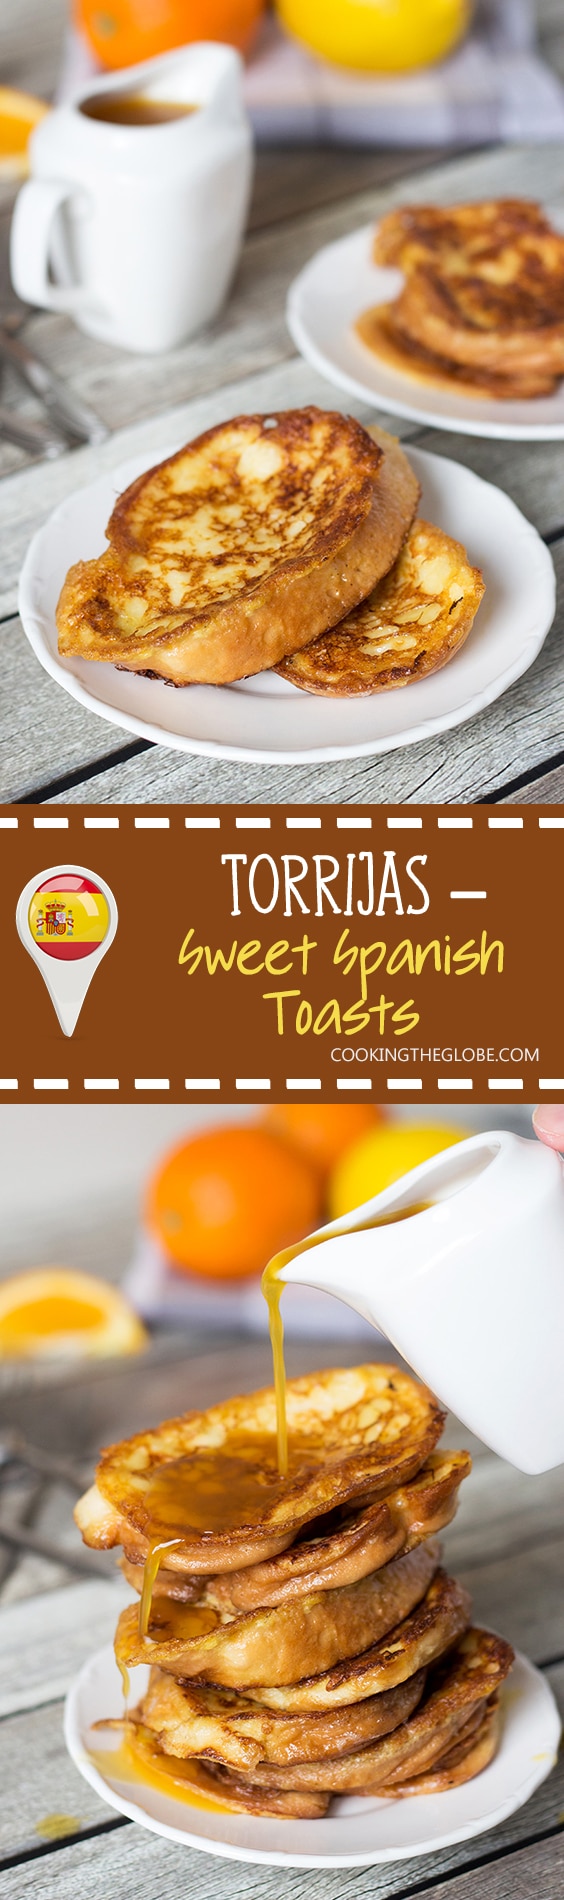 These sweet Spanish toasts, called Torrijas, are soaked in milk and drizzled with an orange-brandy syrup! | cookingtheglobe.com